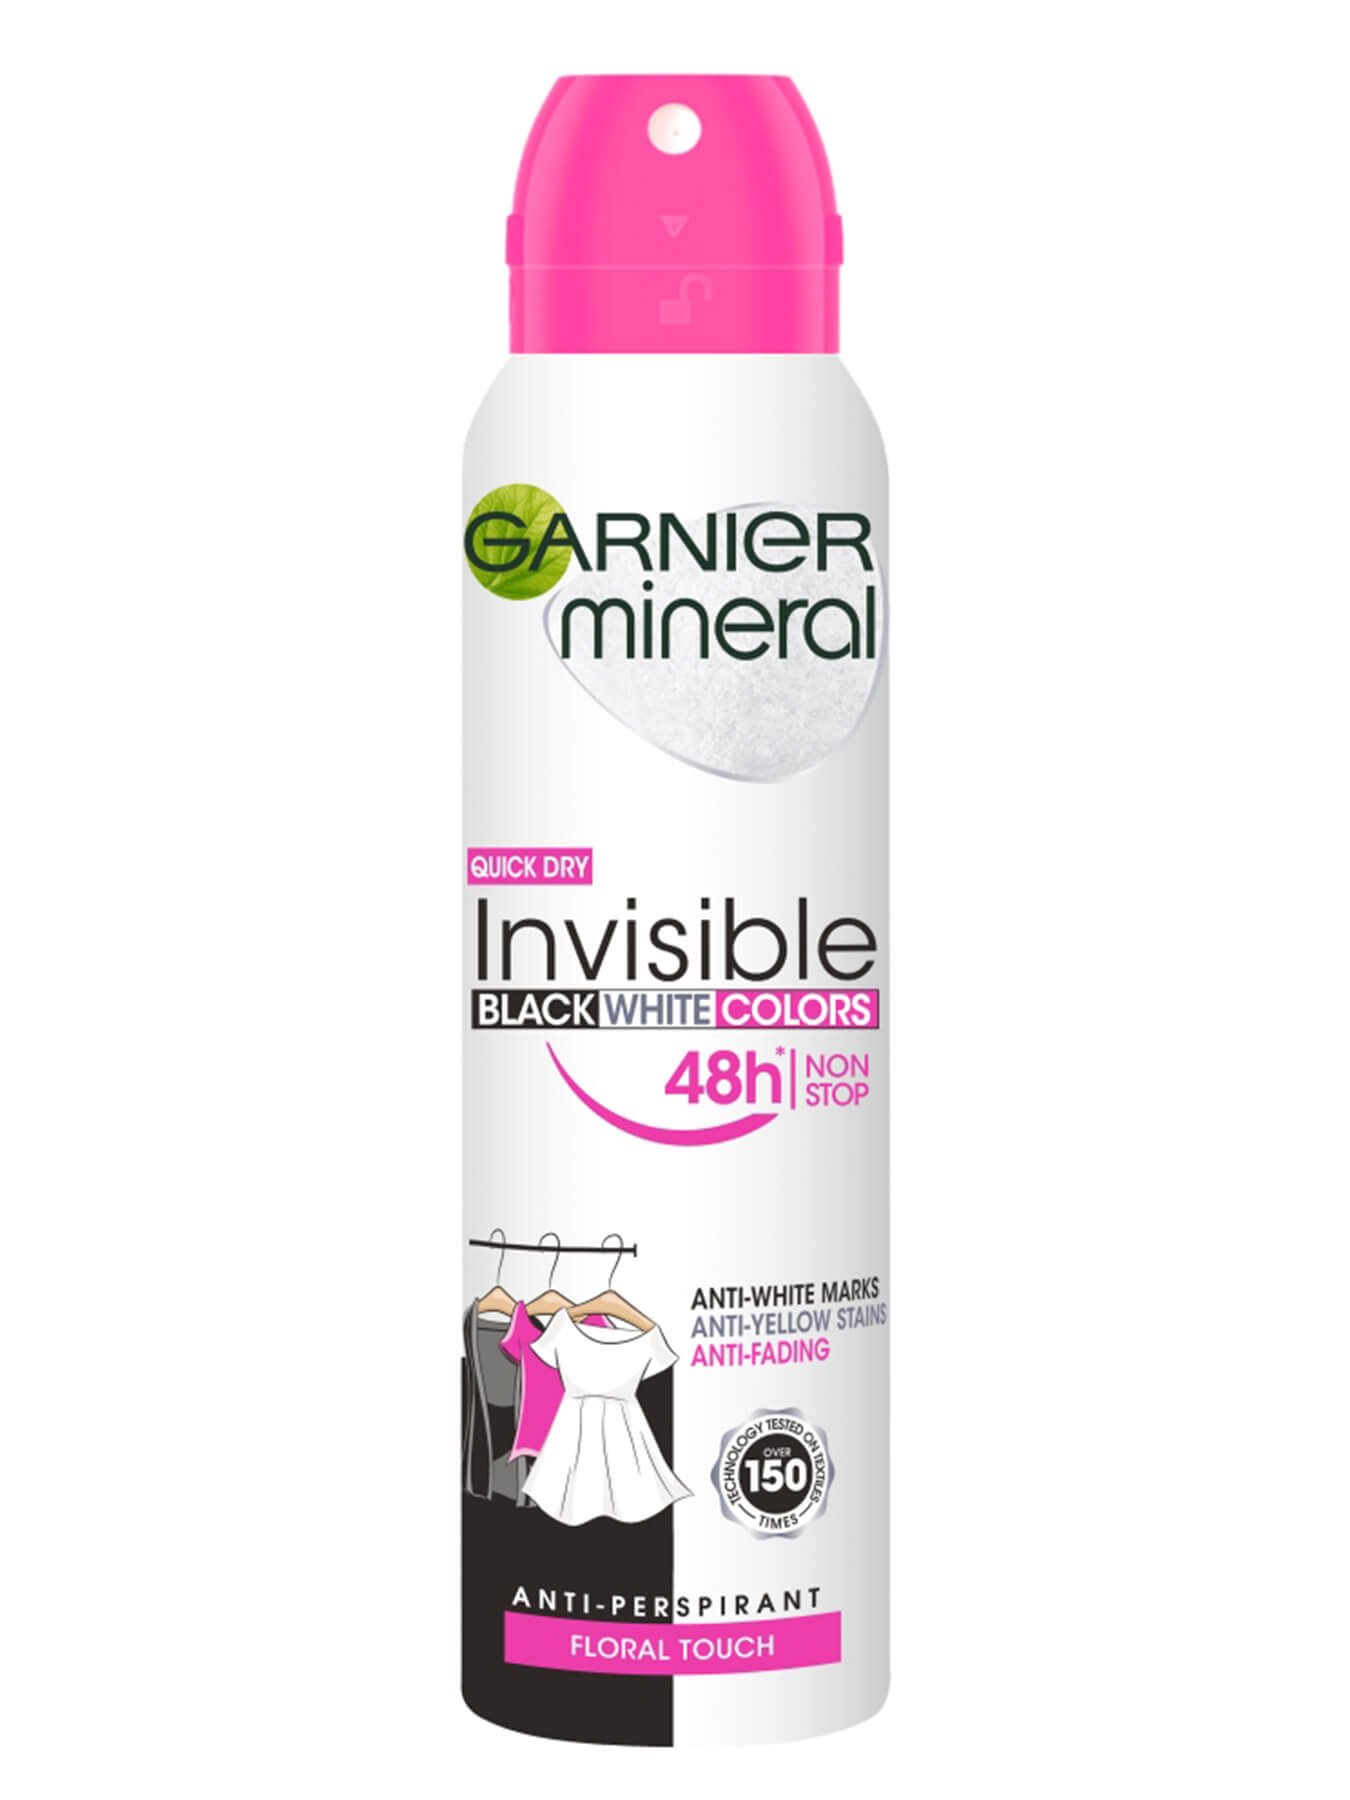 Garnier Mineral Deo Invisible Black, White & Colors Floral Спрей 